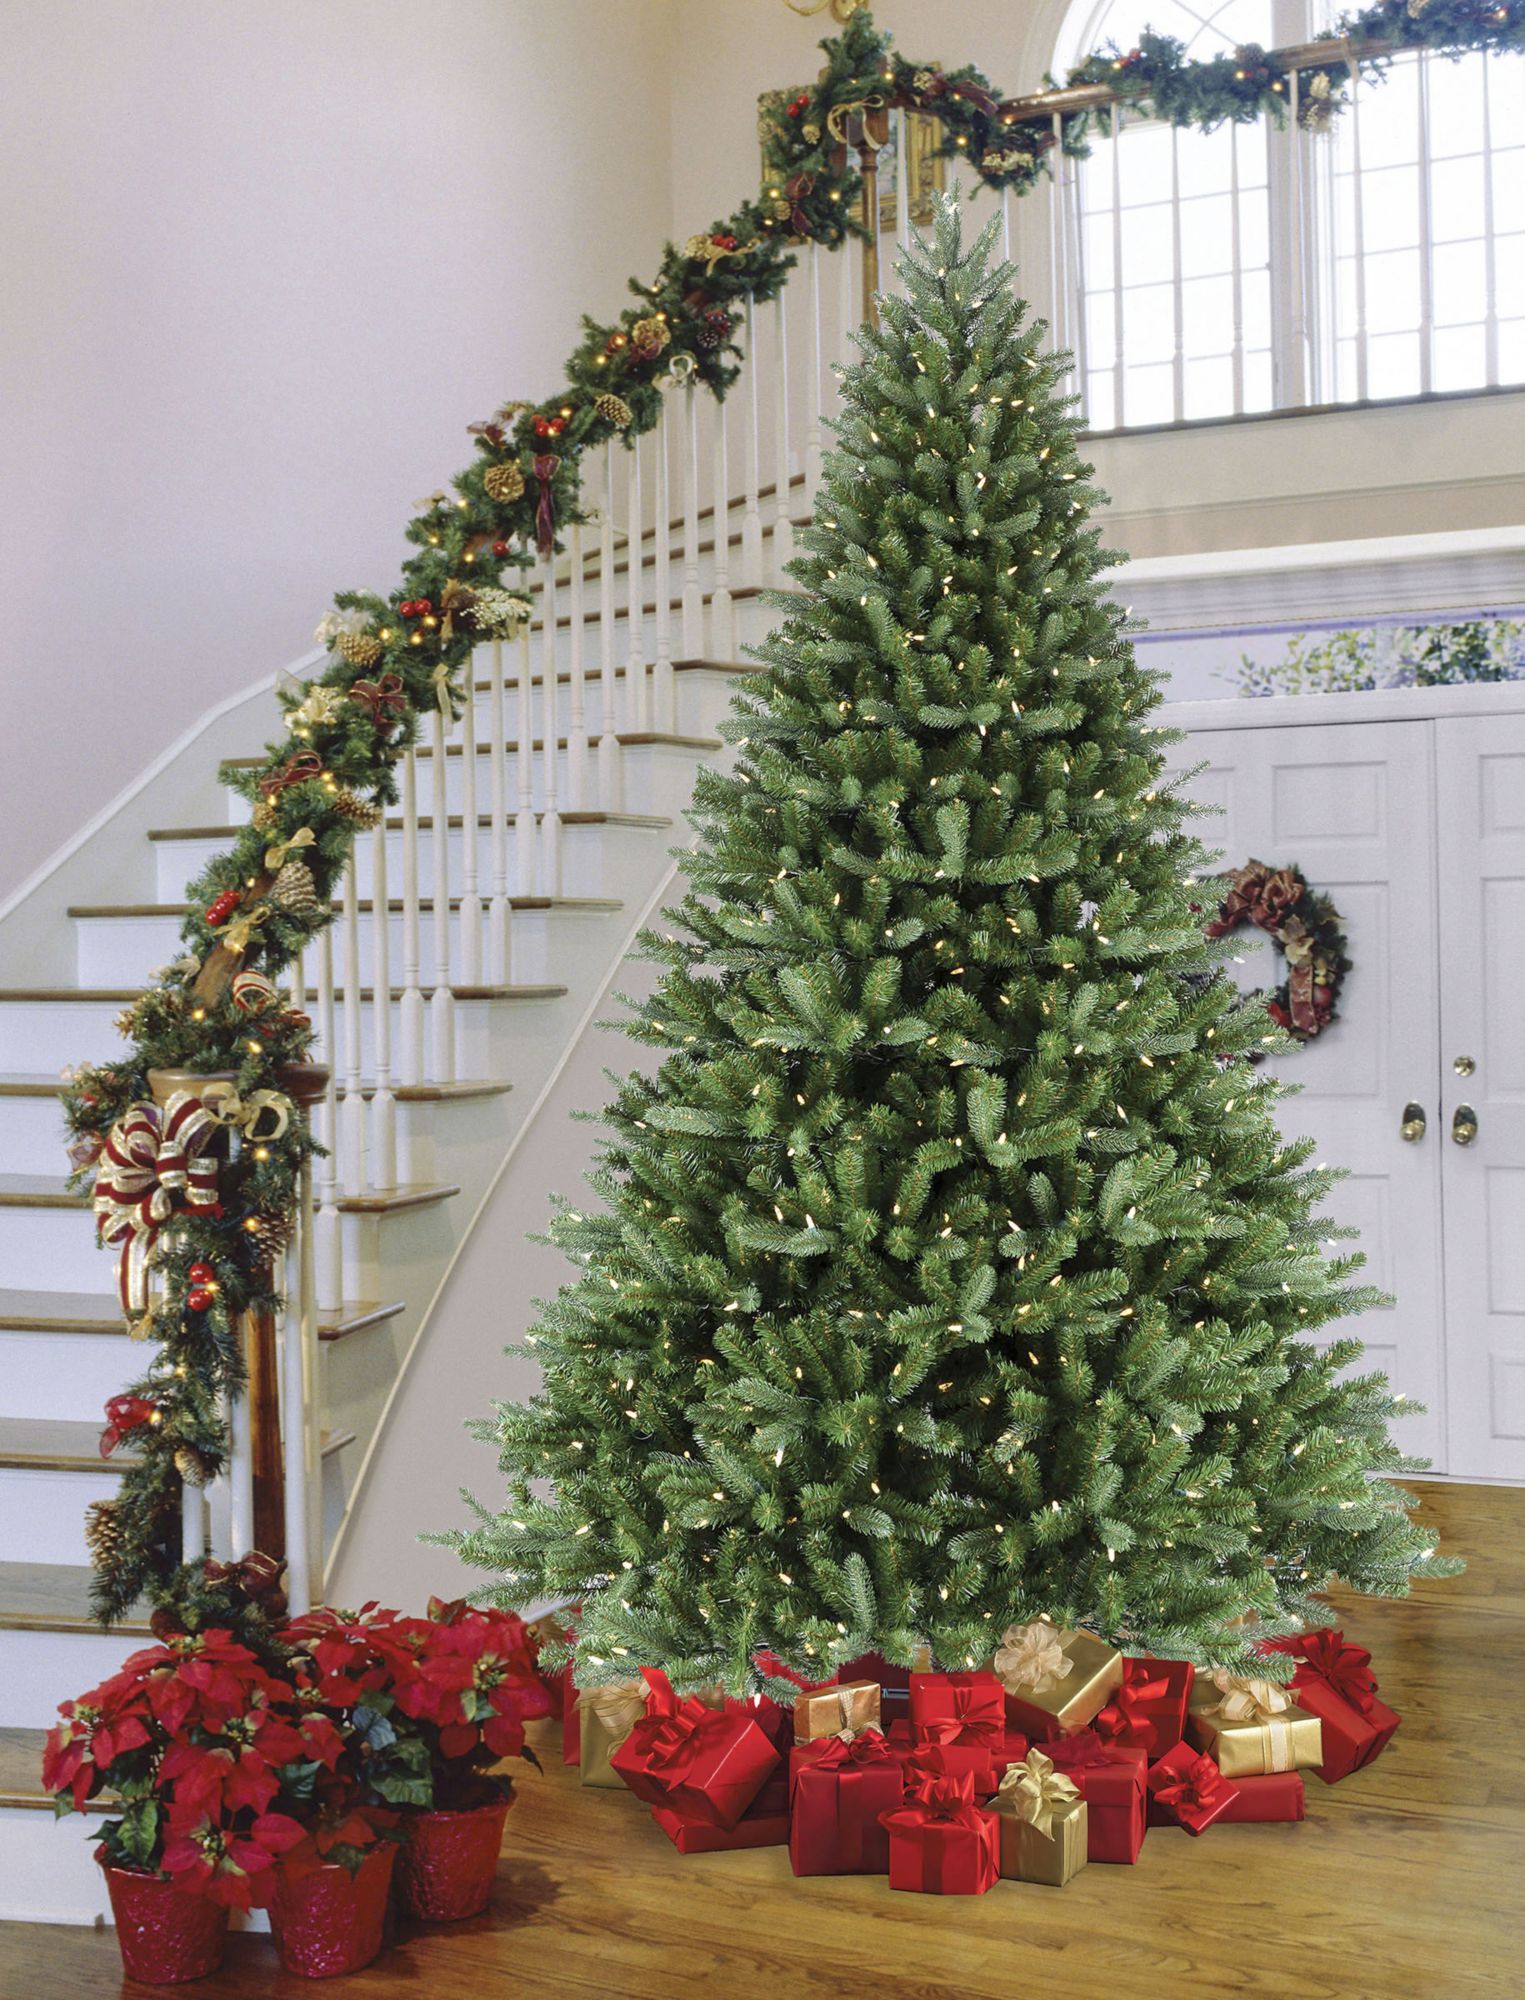 Sylvania 9' 8-Function Color Changing Prelit LED Tree with Foot Pedal